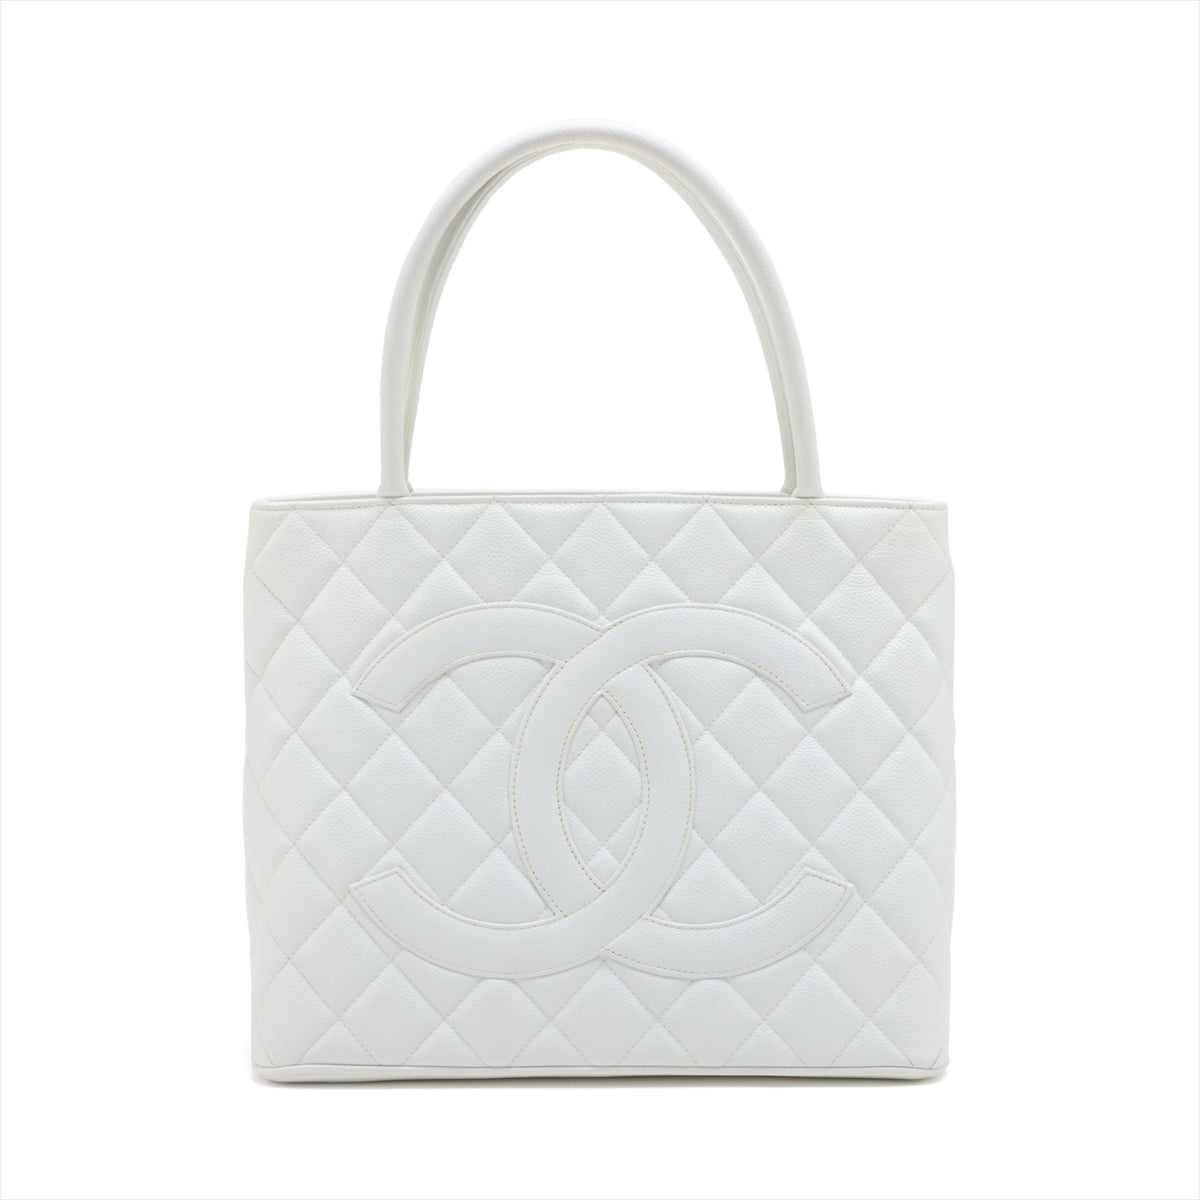 Chanel Re-release Caviarskin Tote bag White Gold Metal fittings 7XXXXXX